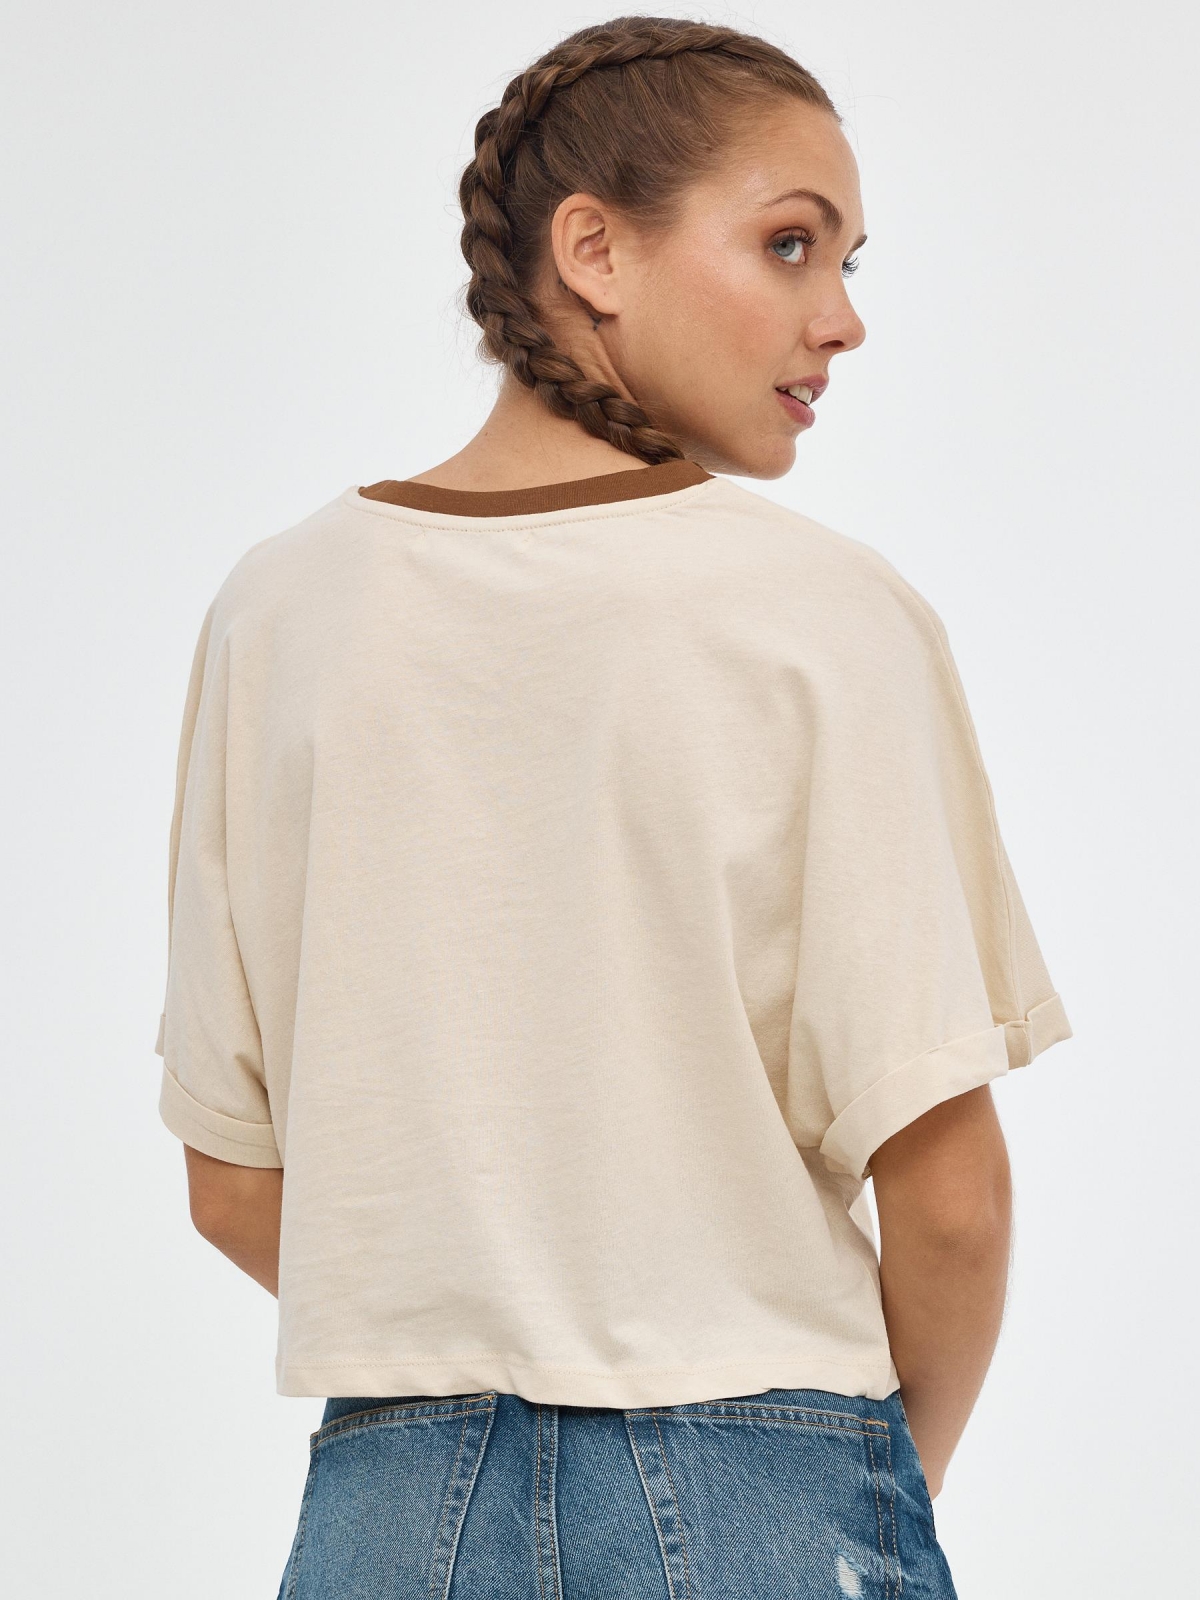 Chameleon crop top sand middle back view